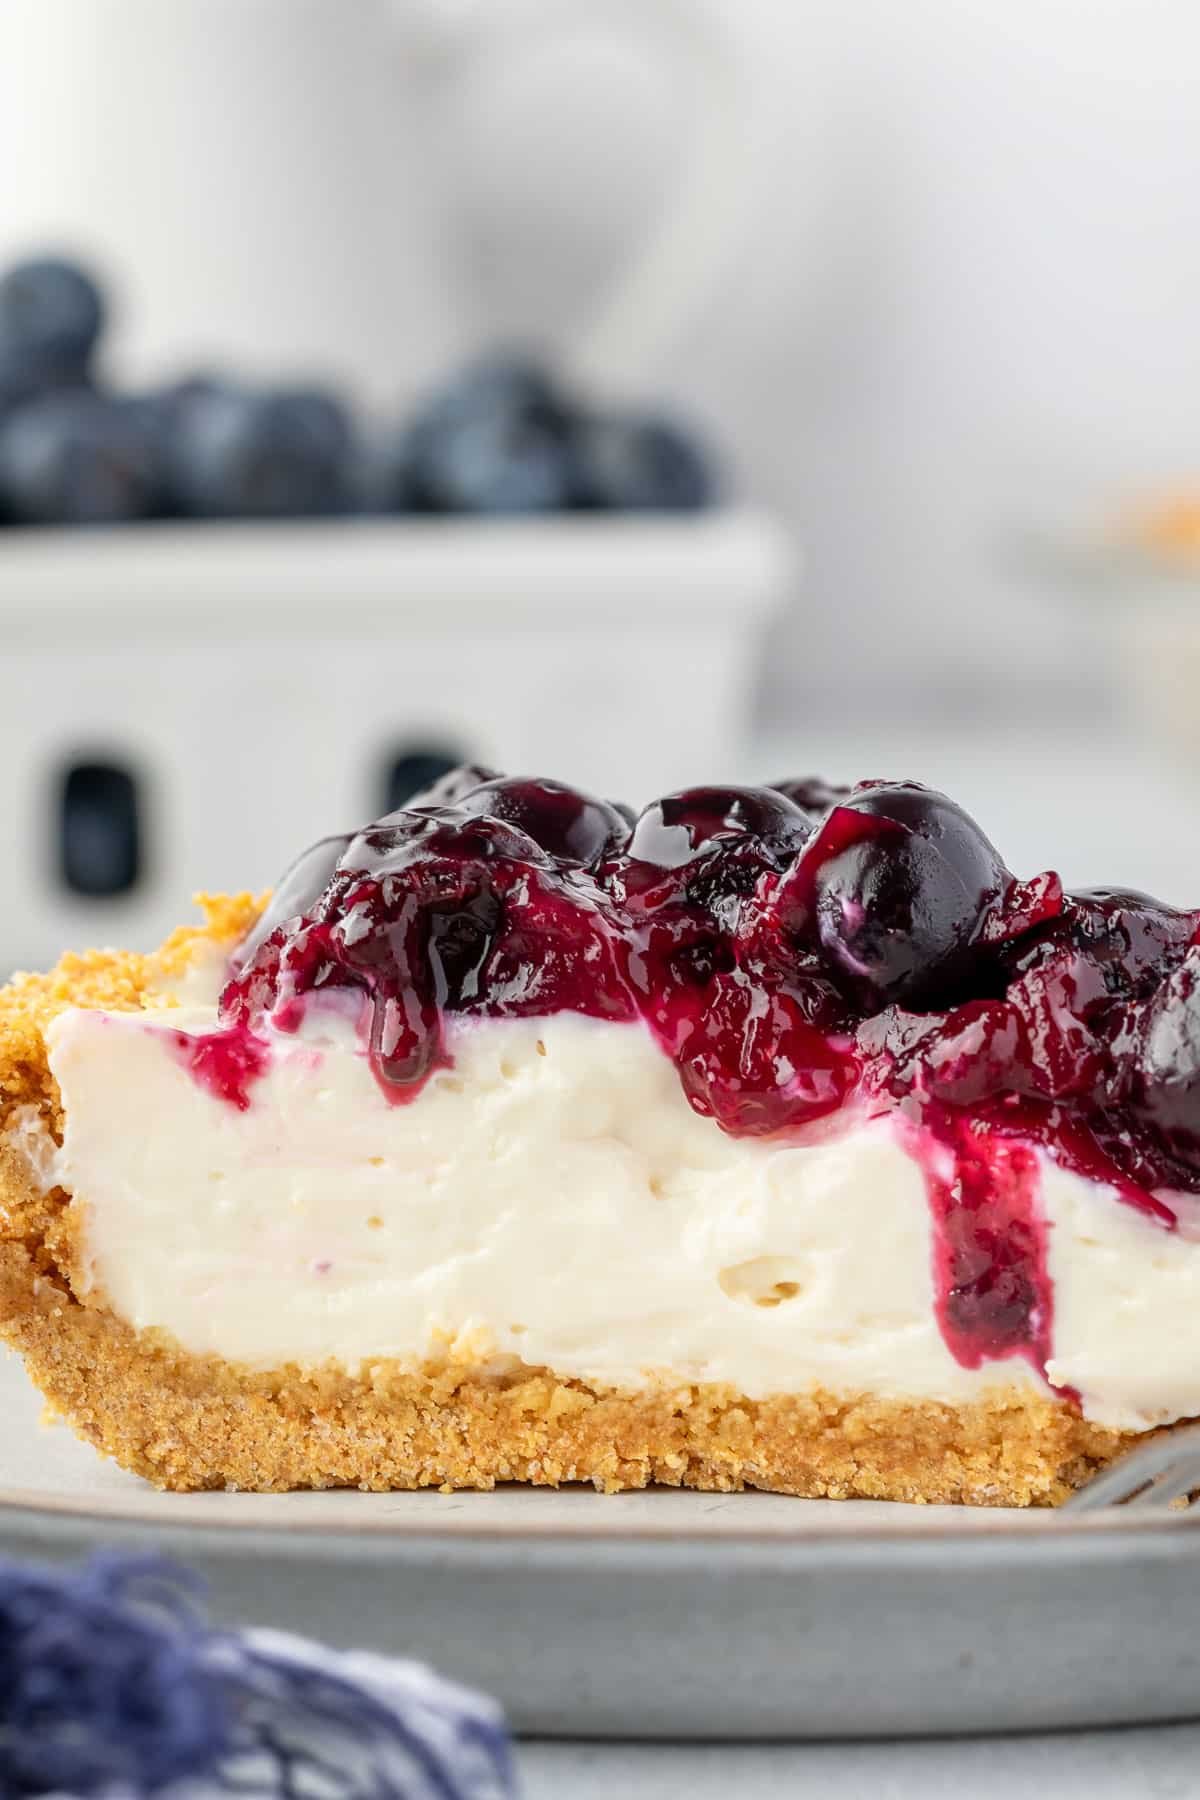 Slice of pie with graham cracker crust, creamy cheesecake filling, and blueberry pie filling.